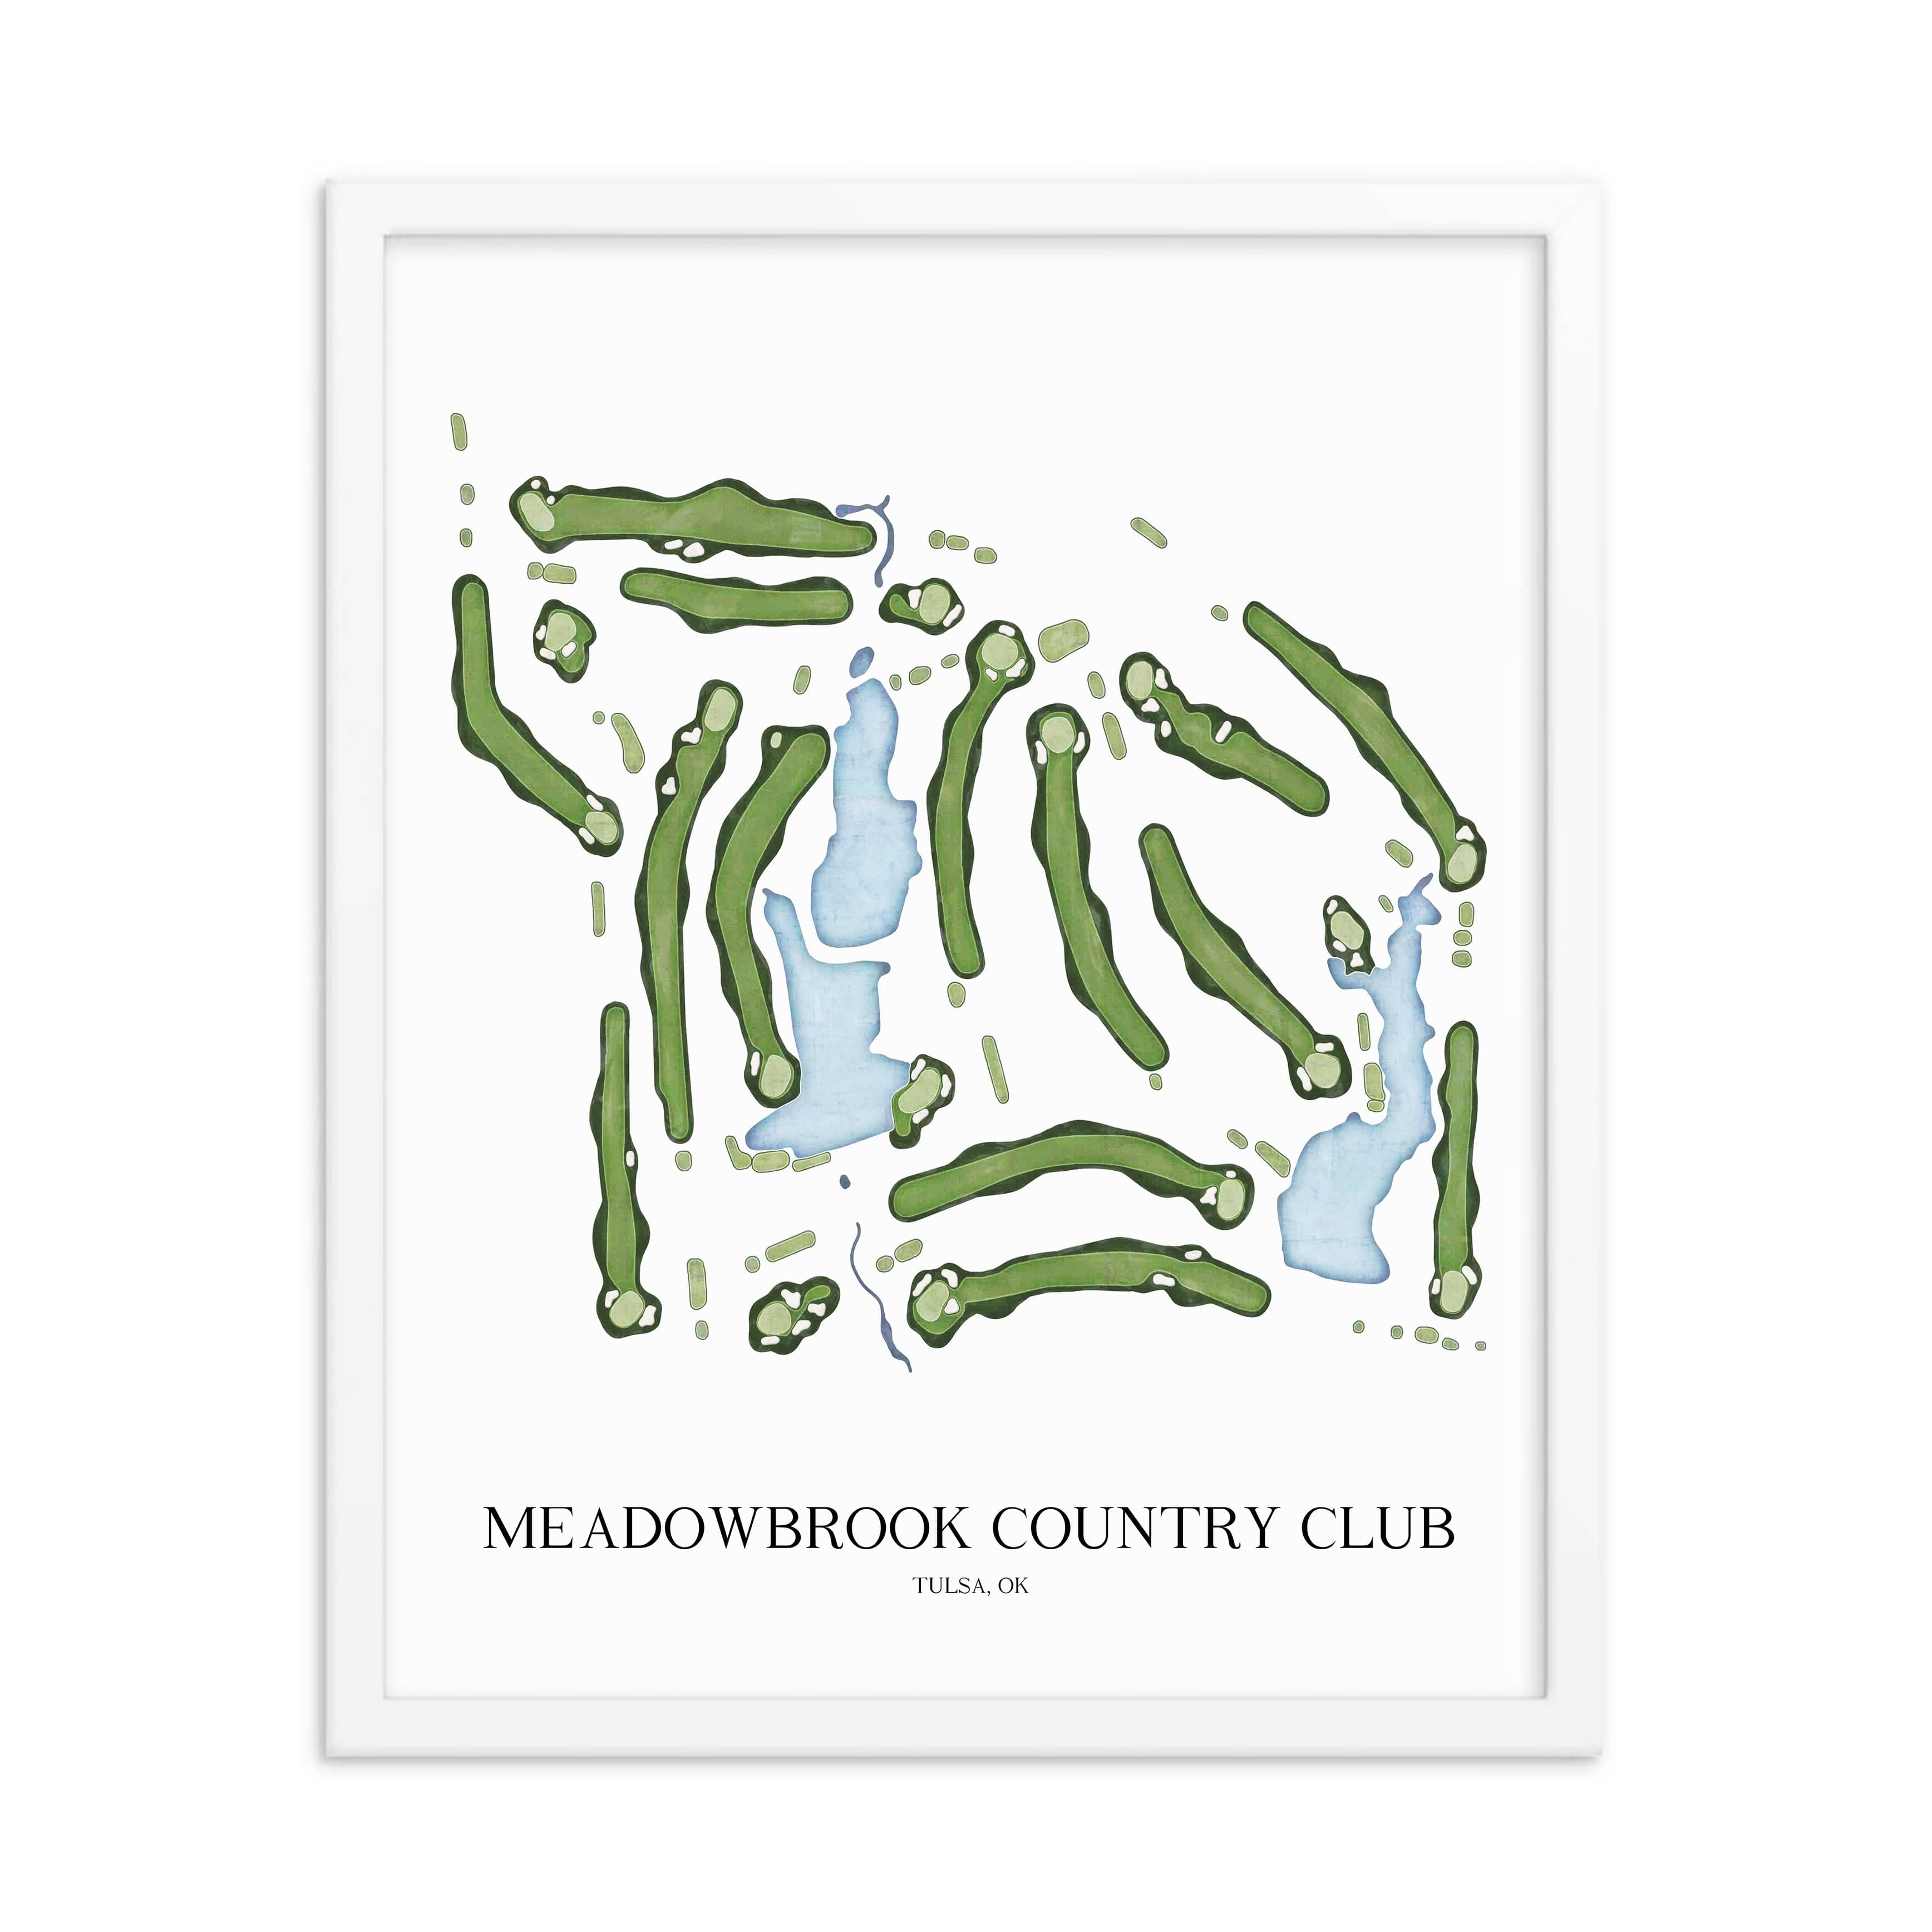 The 19th Hole Golf Shop - Golf Course Prints -  Meadowbrook Country Club Golf Course Map